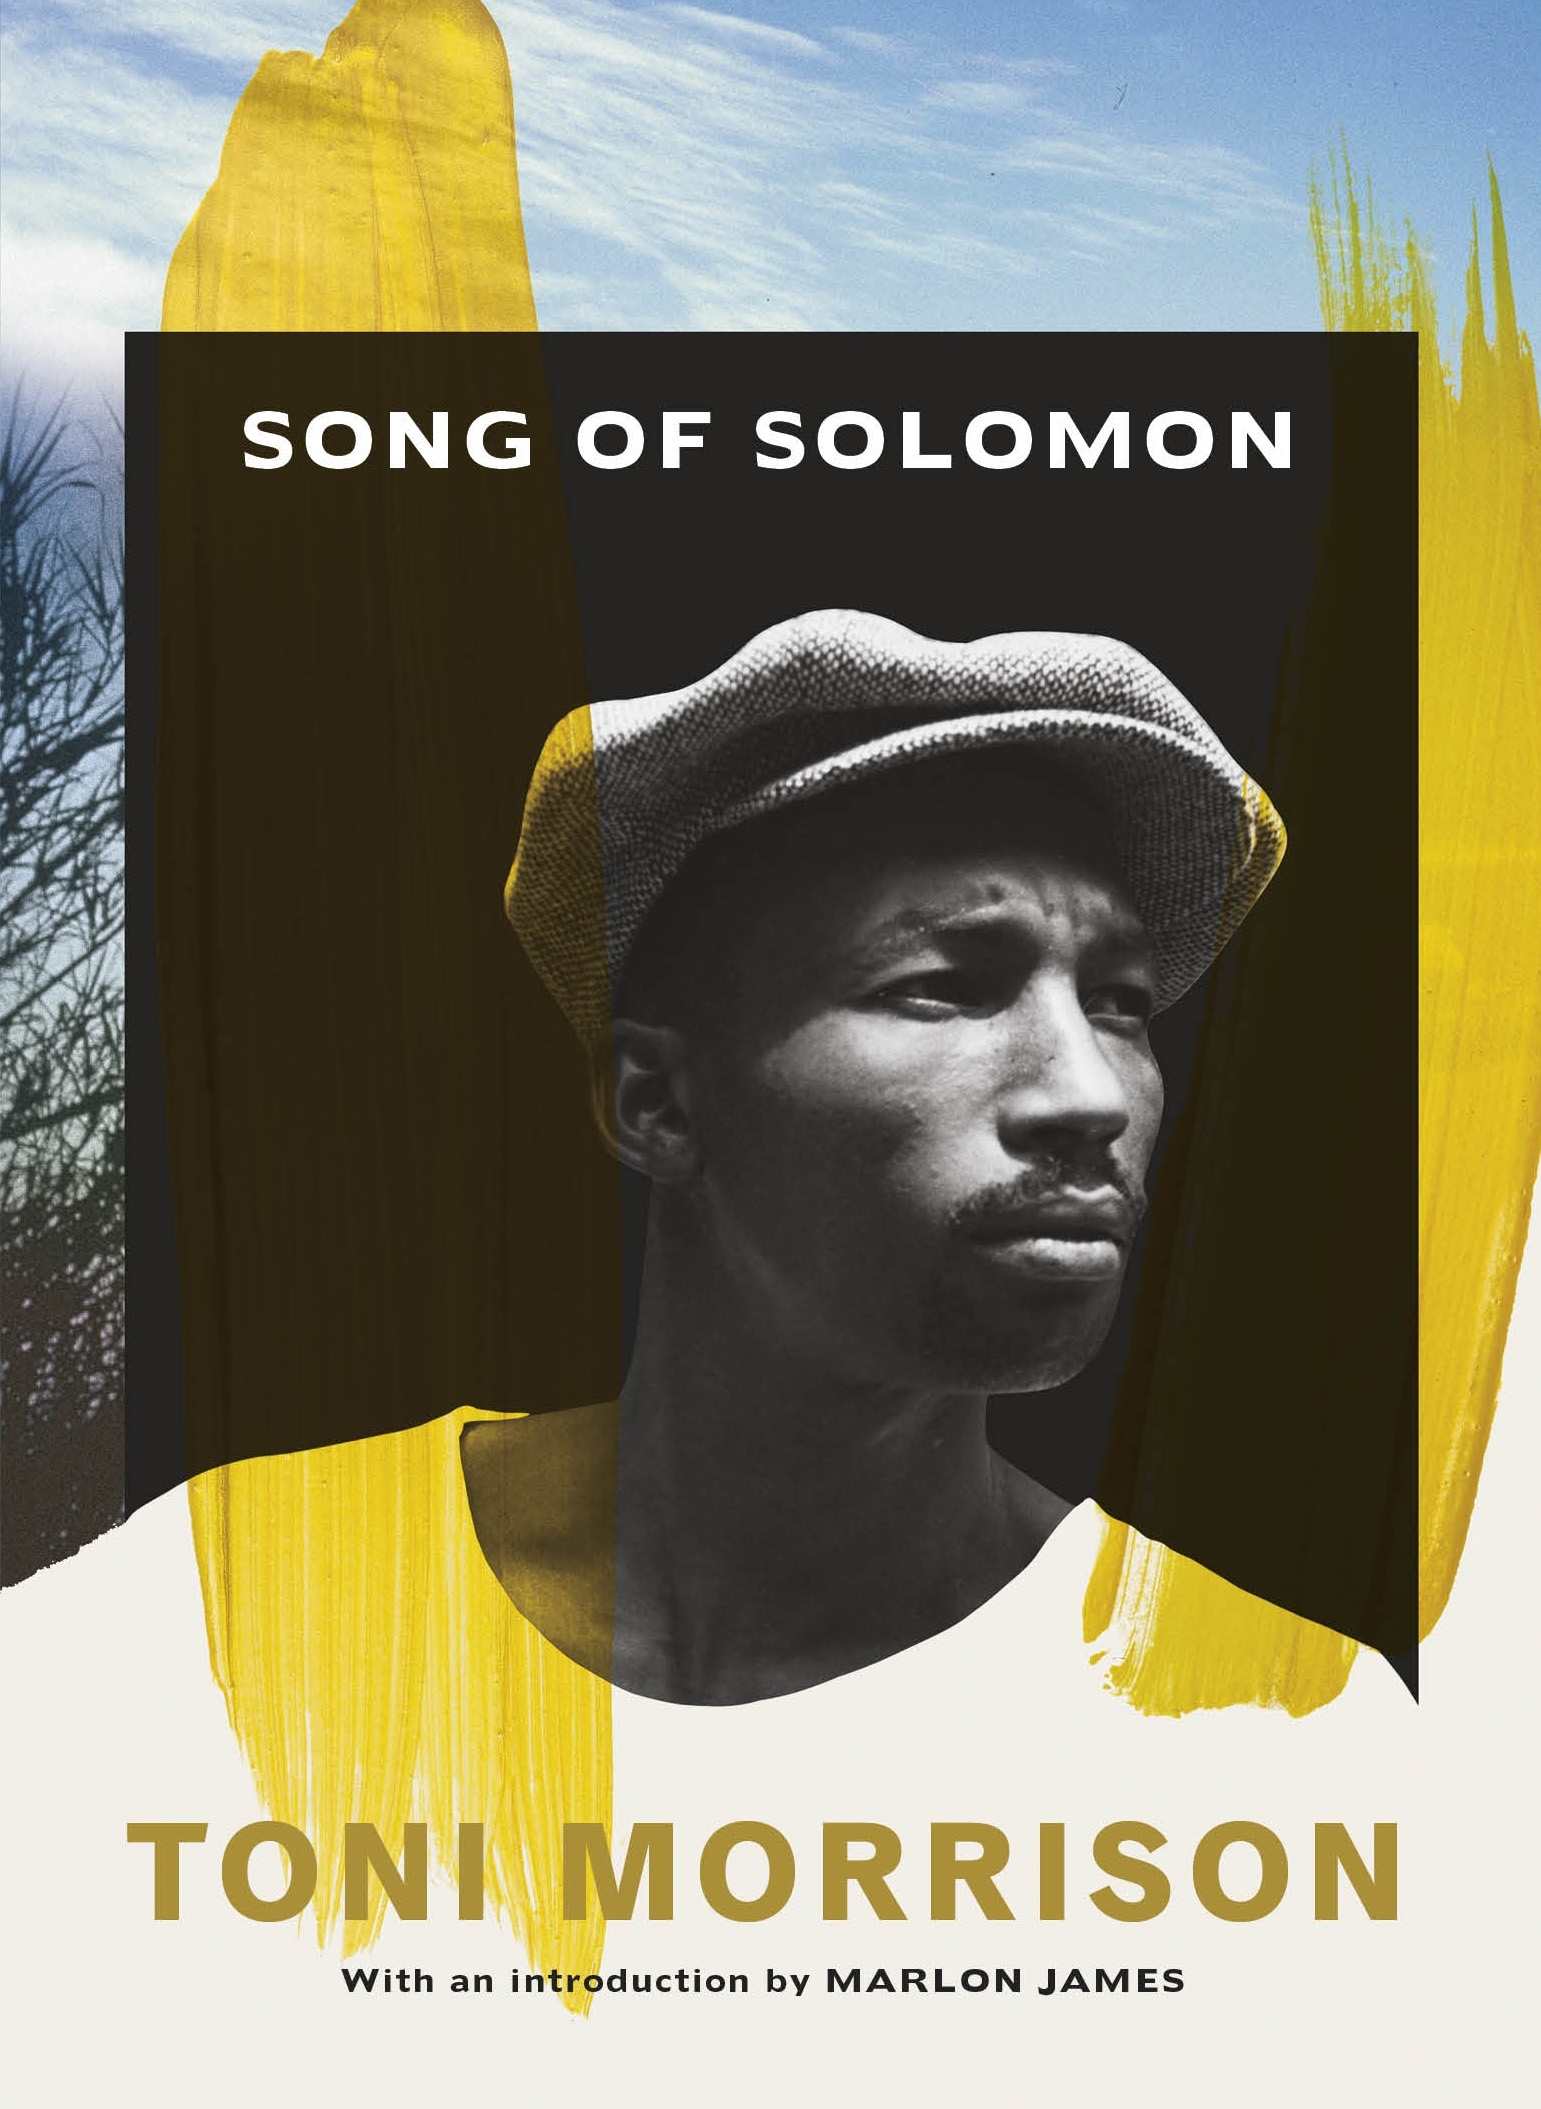 Banned book review: Song of Solomon